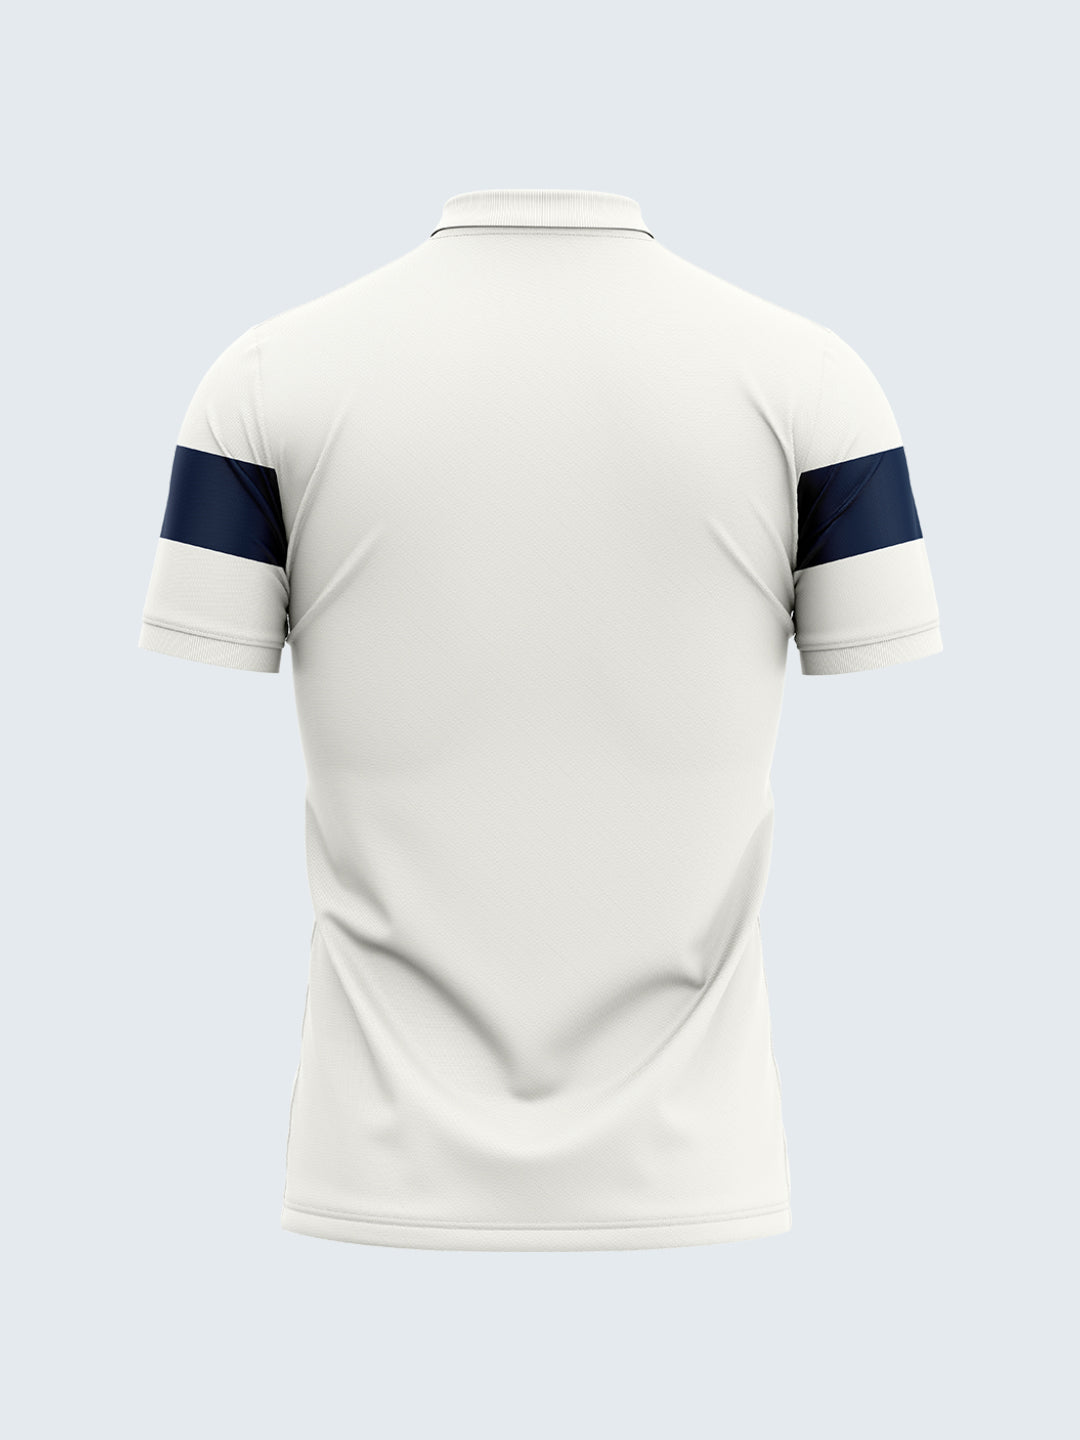 Customise Tennis Polo T-Shirt - 2132WH - Front